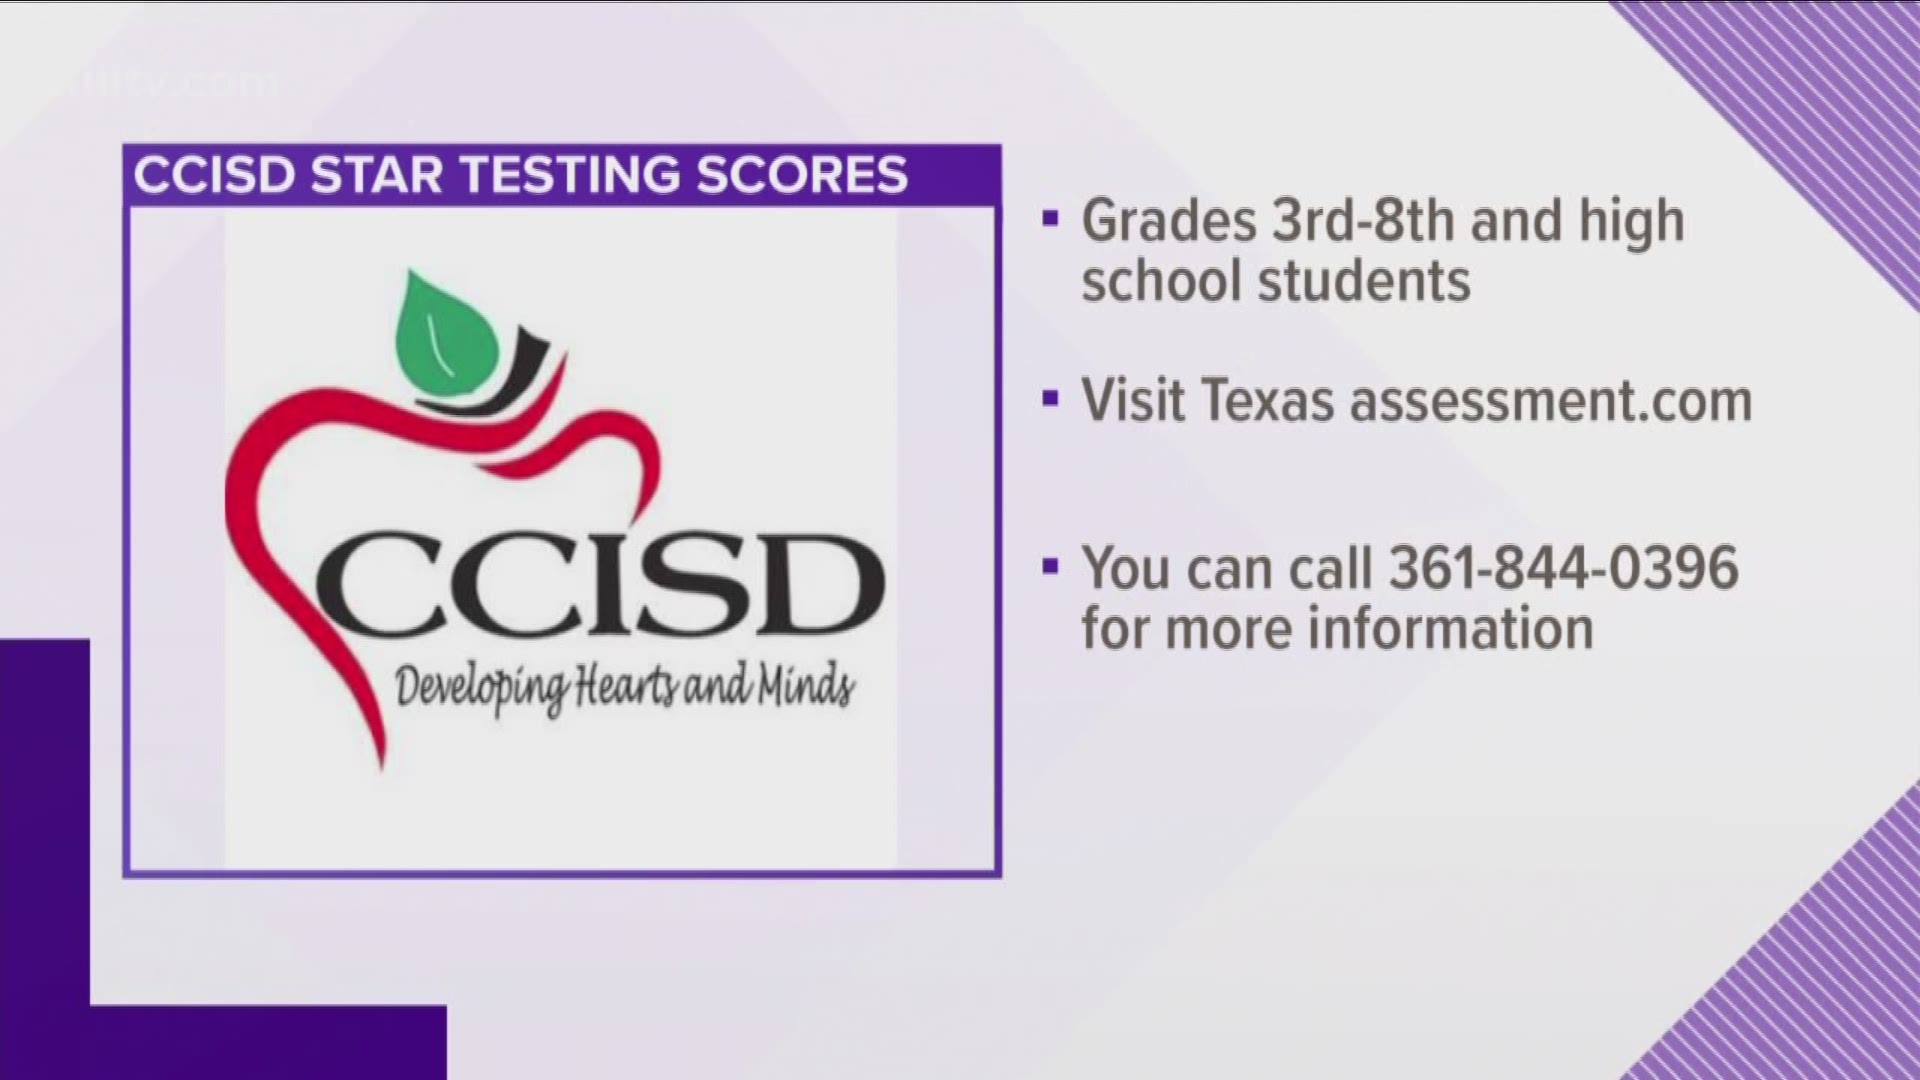 CCISD STAAR testing results available online